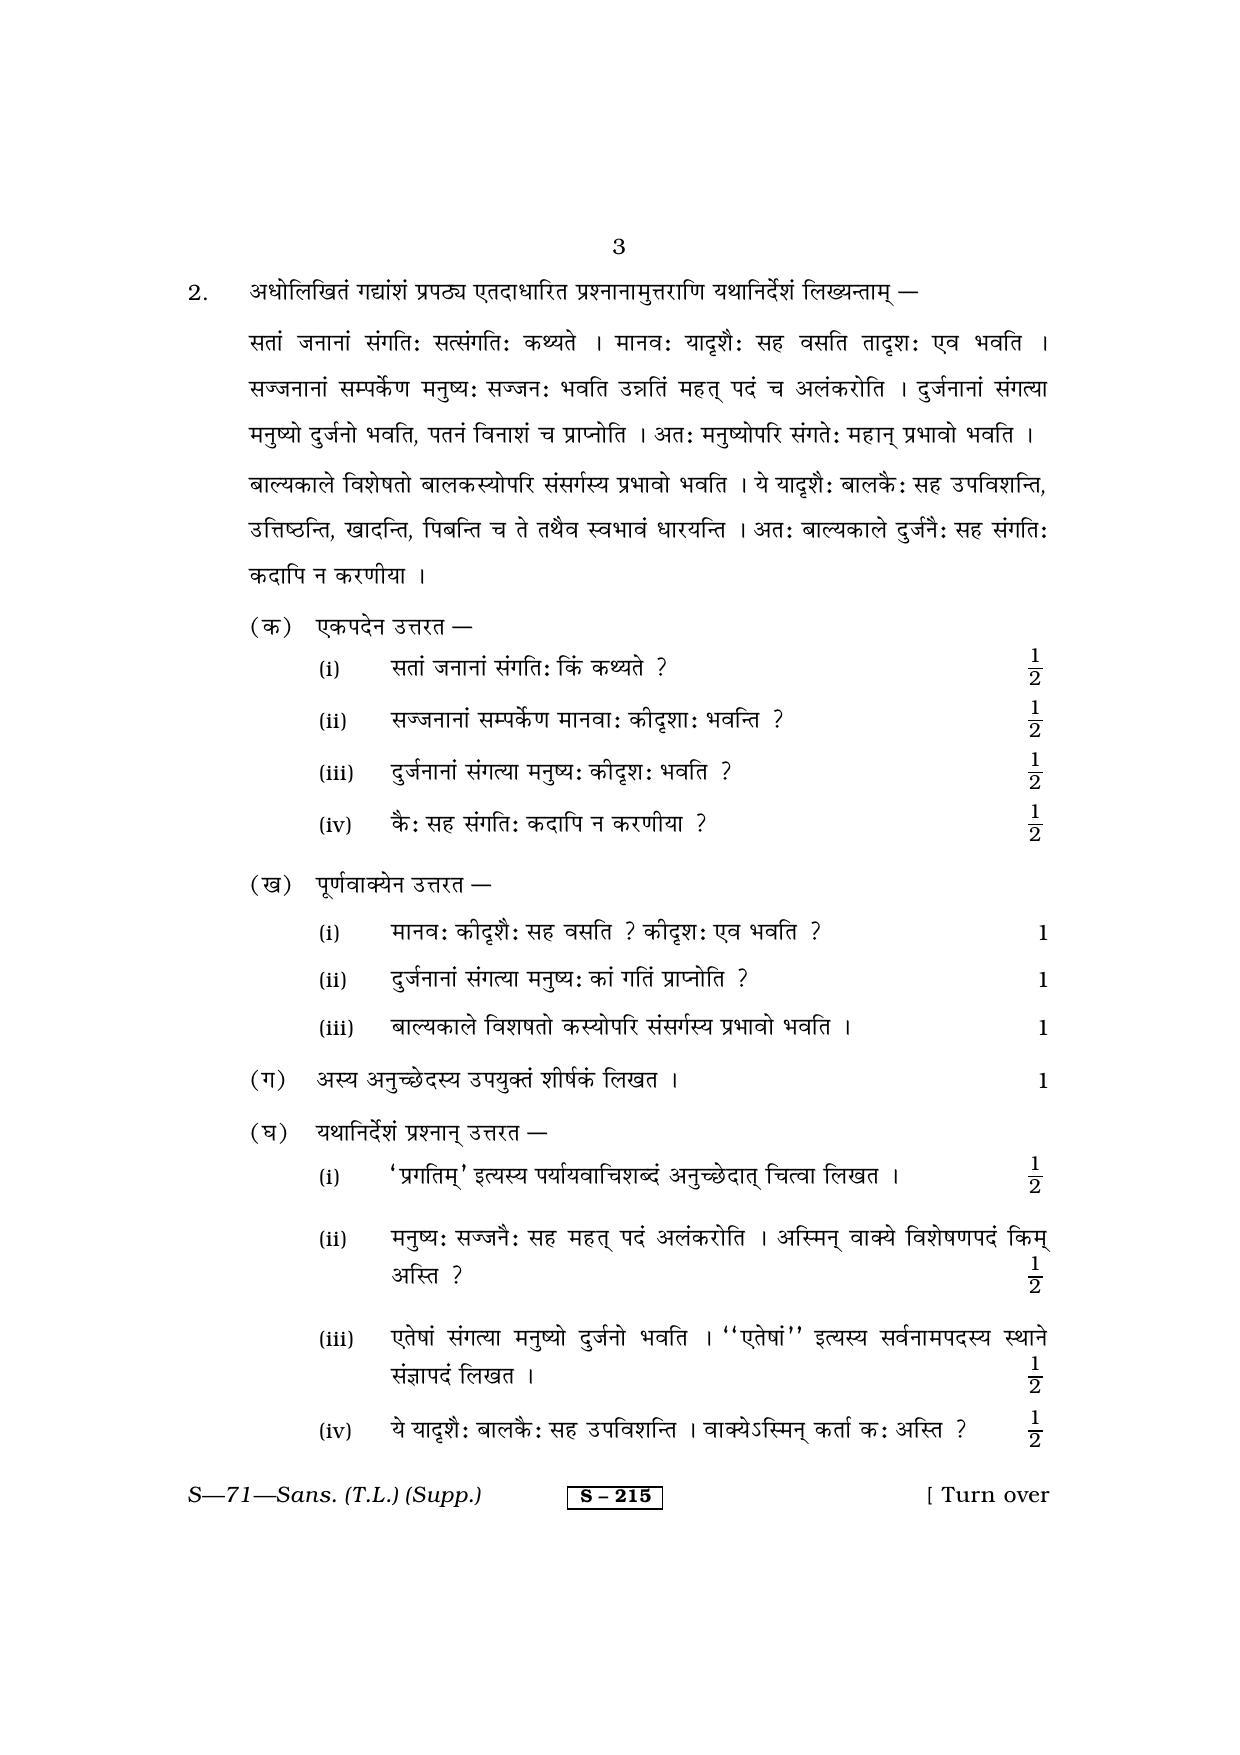 RBSE Class 10 Sanskrit (T.L.) Supplementary 2013 Question Paper - Page 3